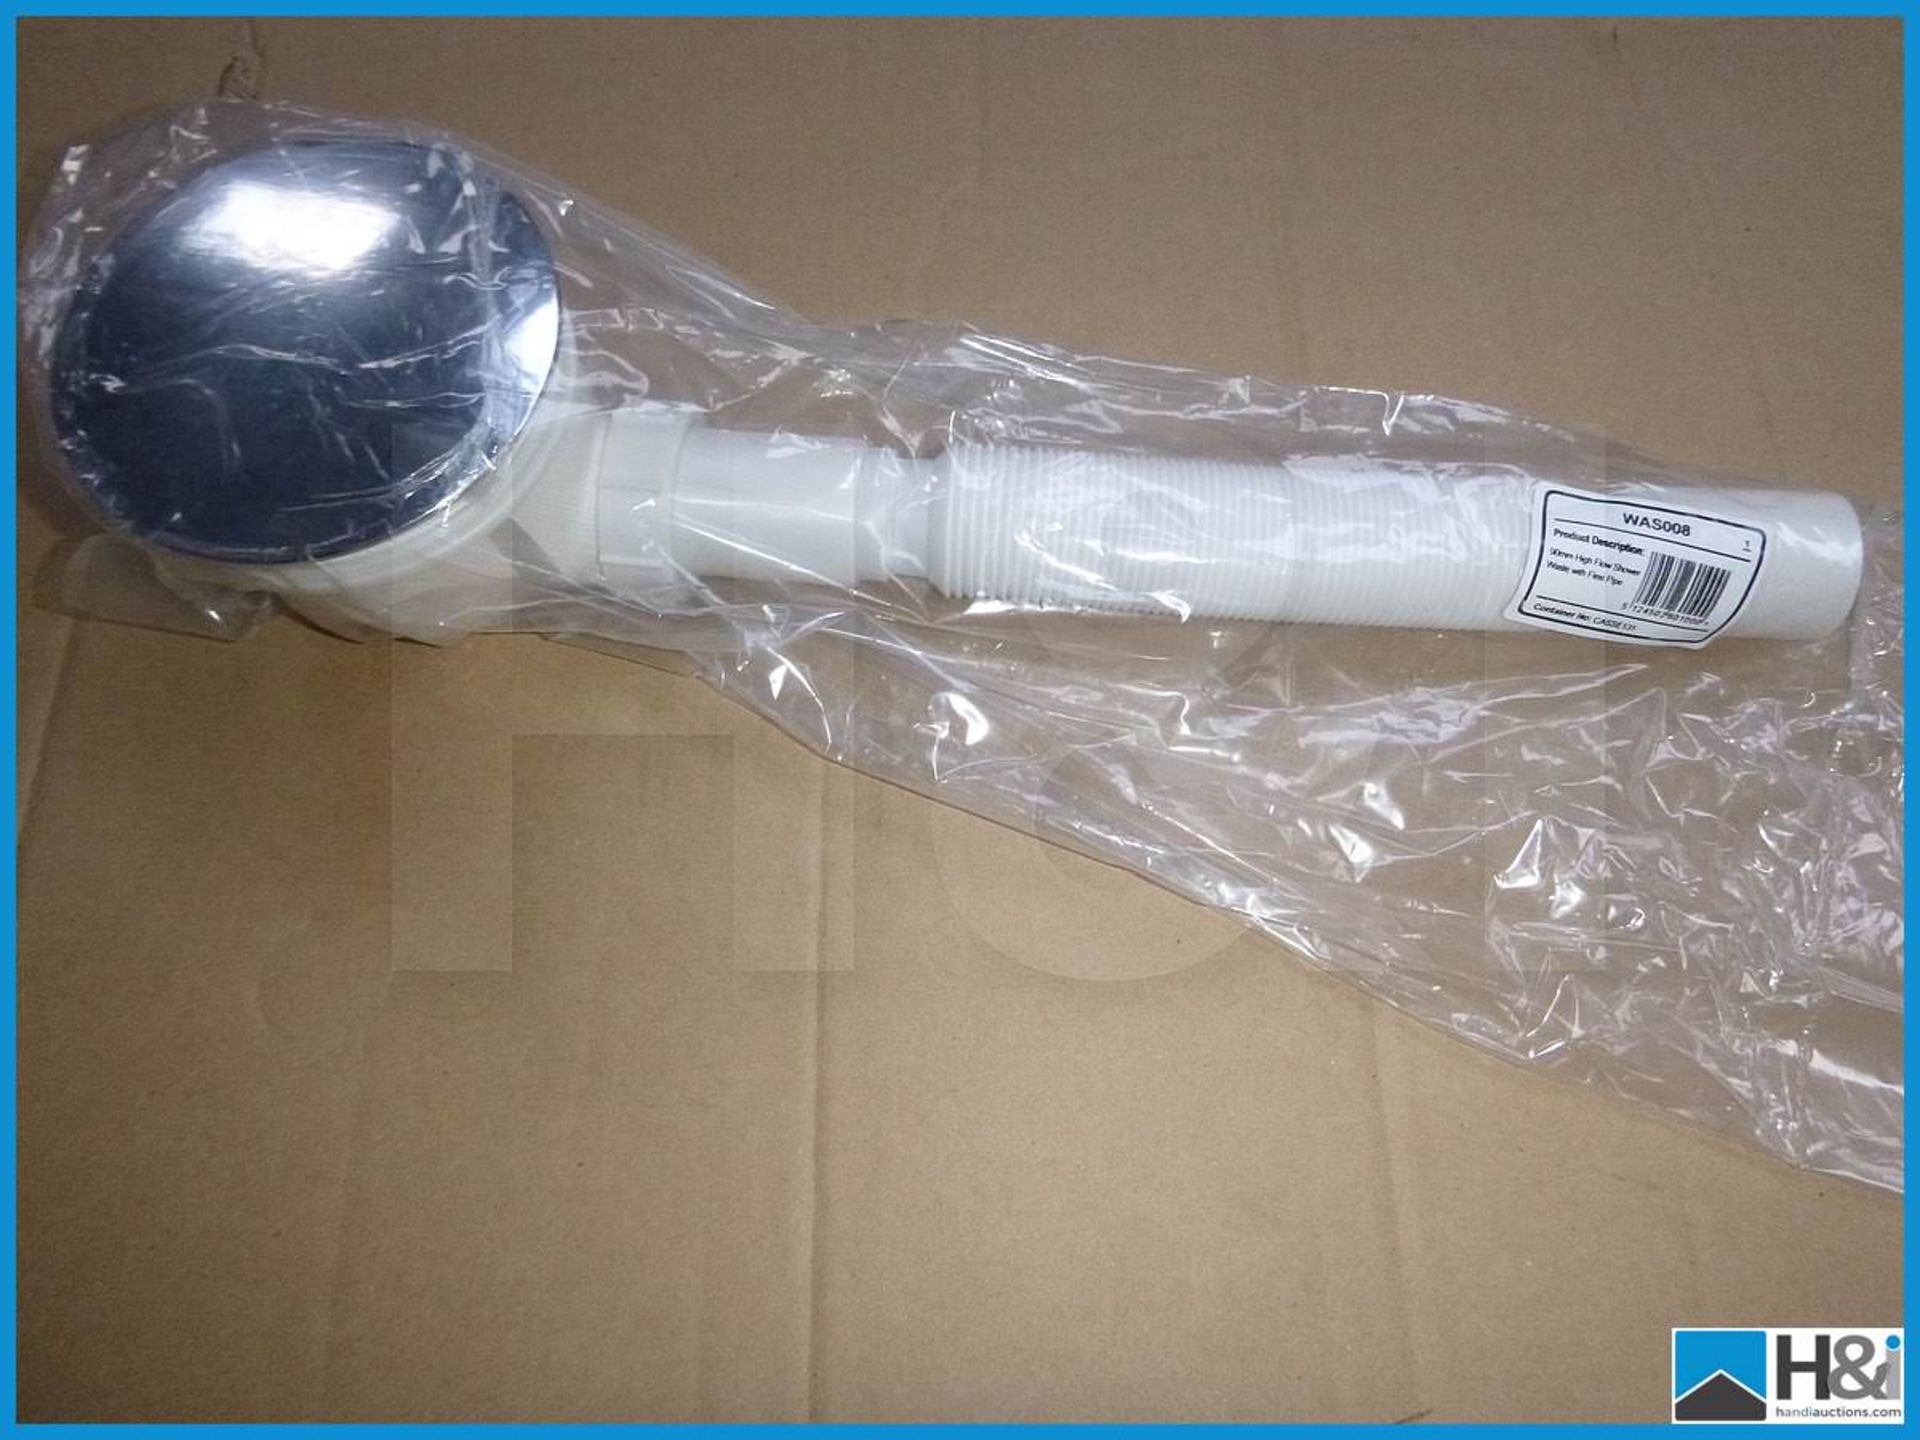 Designer 90mm WAS008 high flow shower waste with flexible pipe. New and Boxed. Suggested